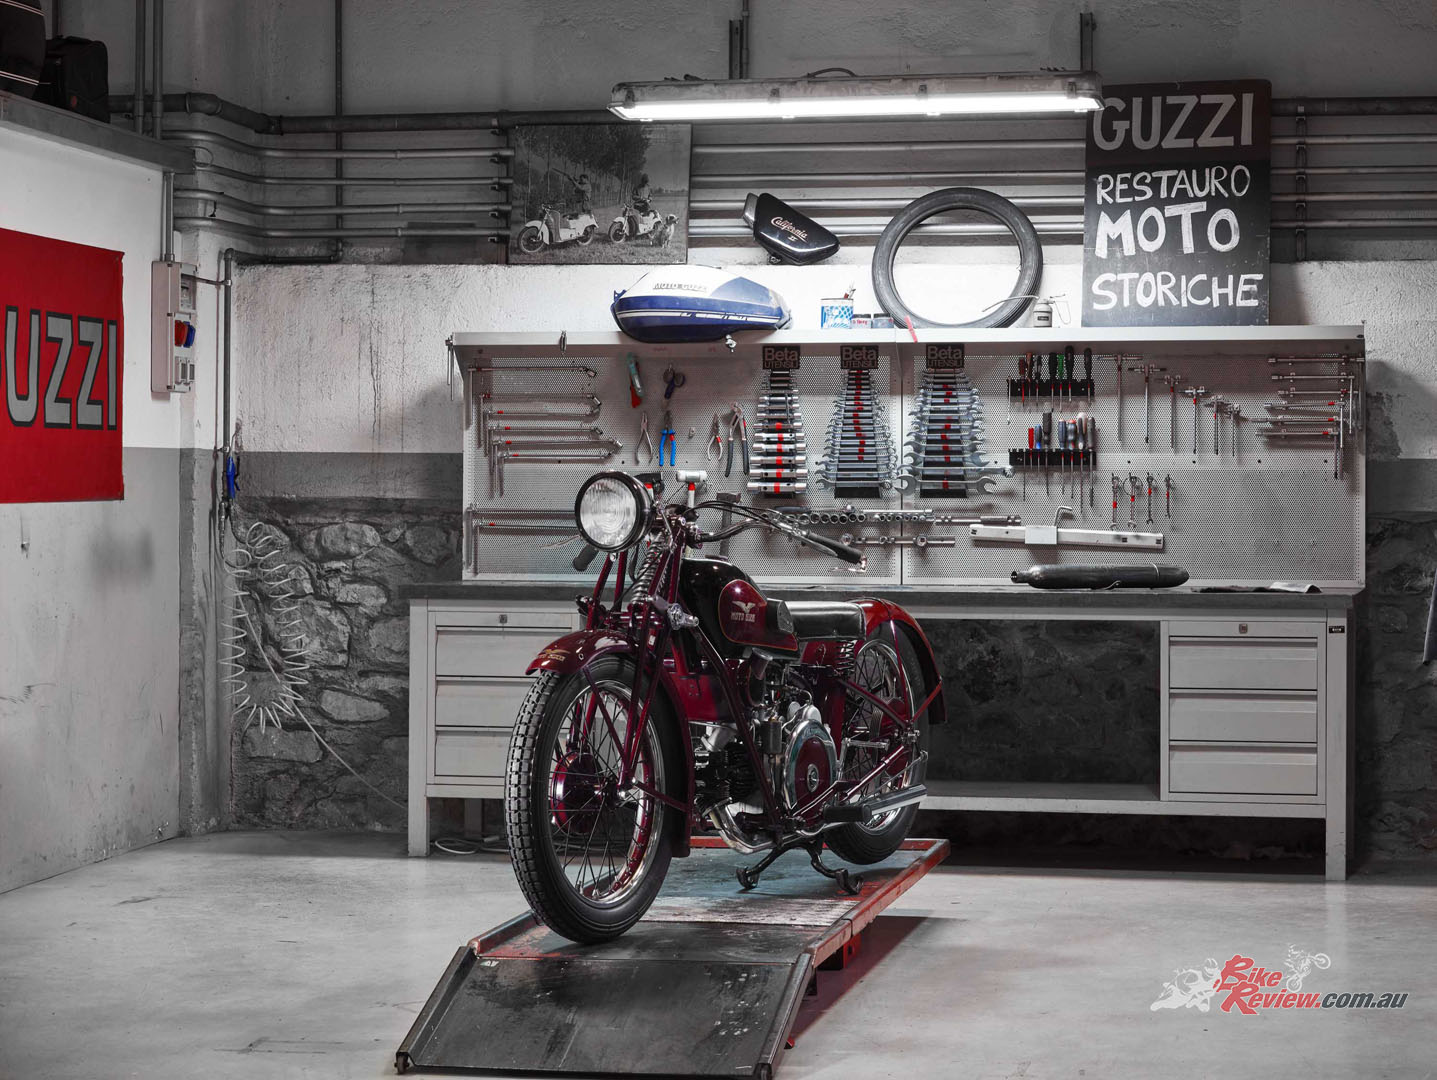 From the G.P., a one-of-a-kind model that actually dates to before the foundation of Moto Guzzi, to the latest models currently on the production line.